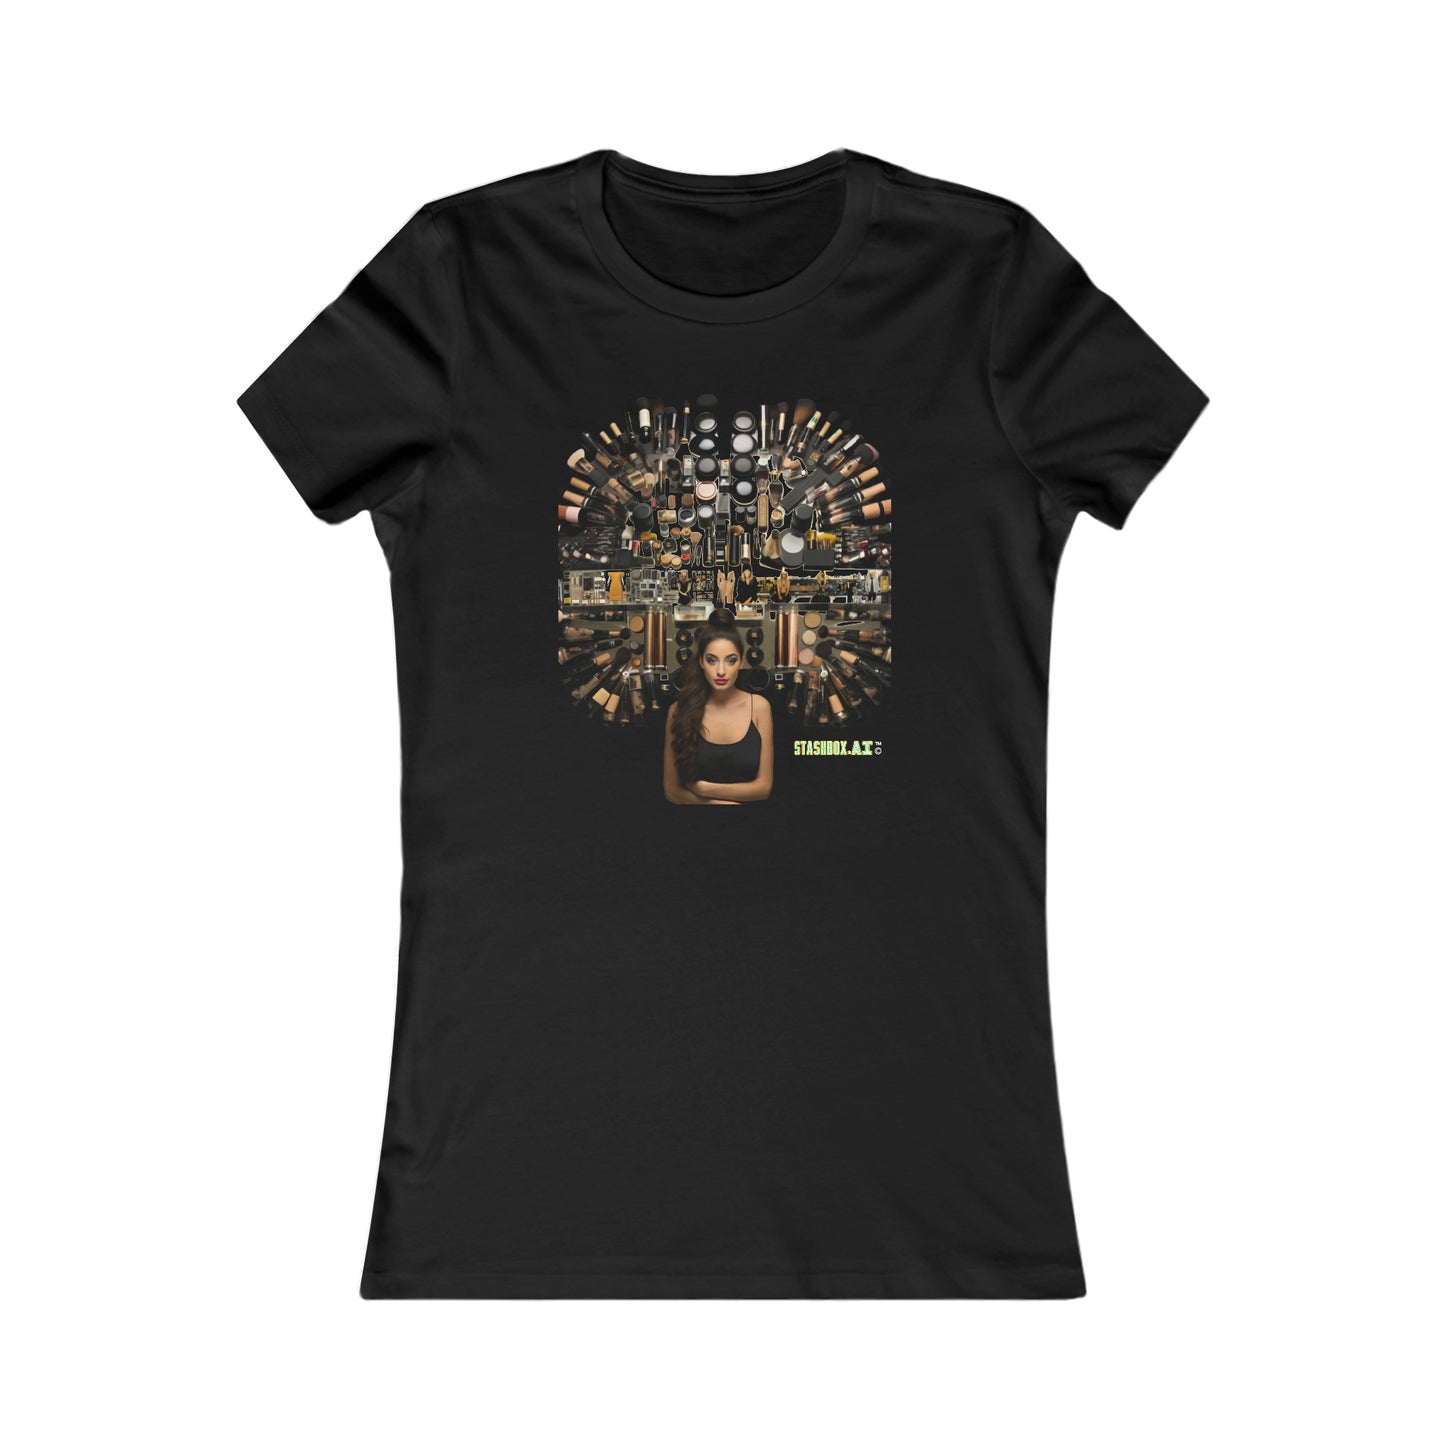 Women's Favorite T-Shirt A Girl and her Makeup Knolling Art Style 007